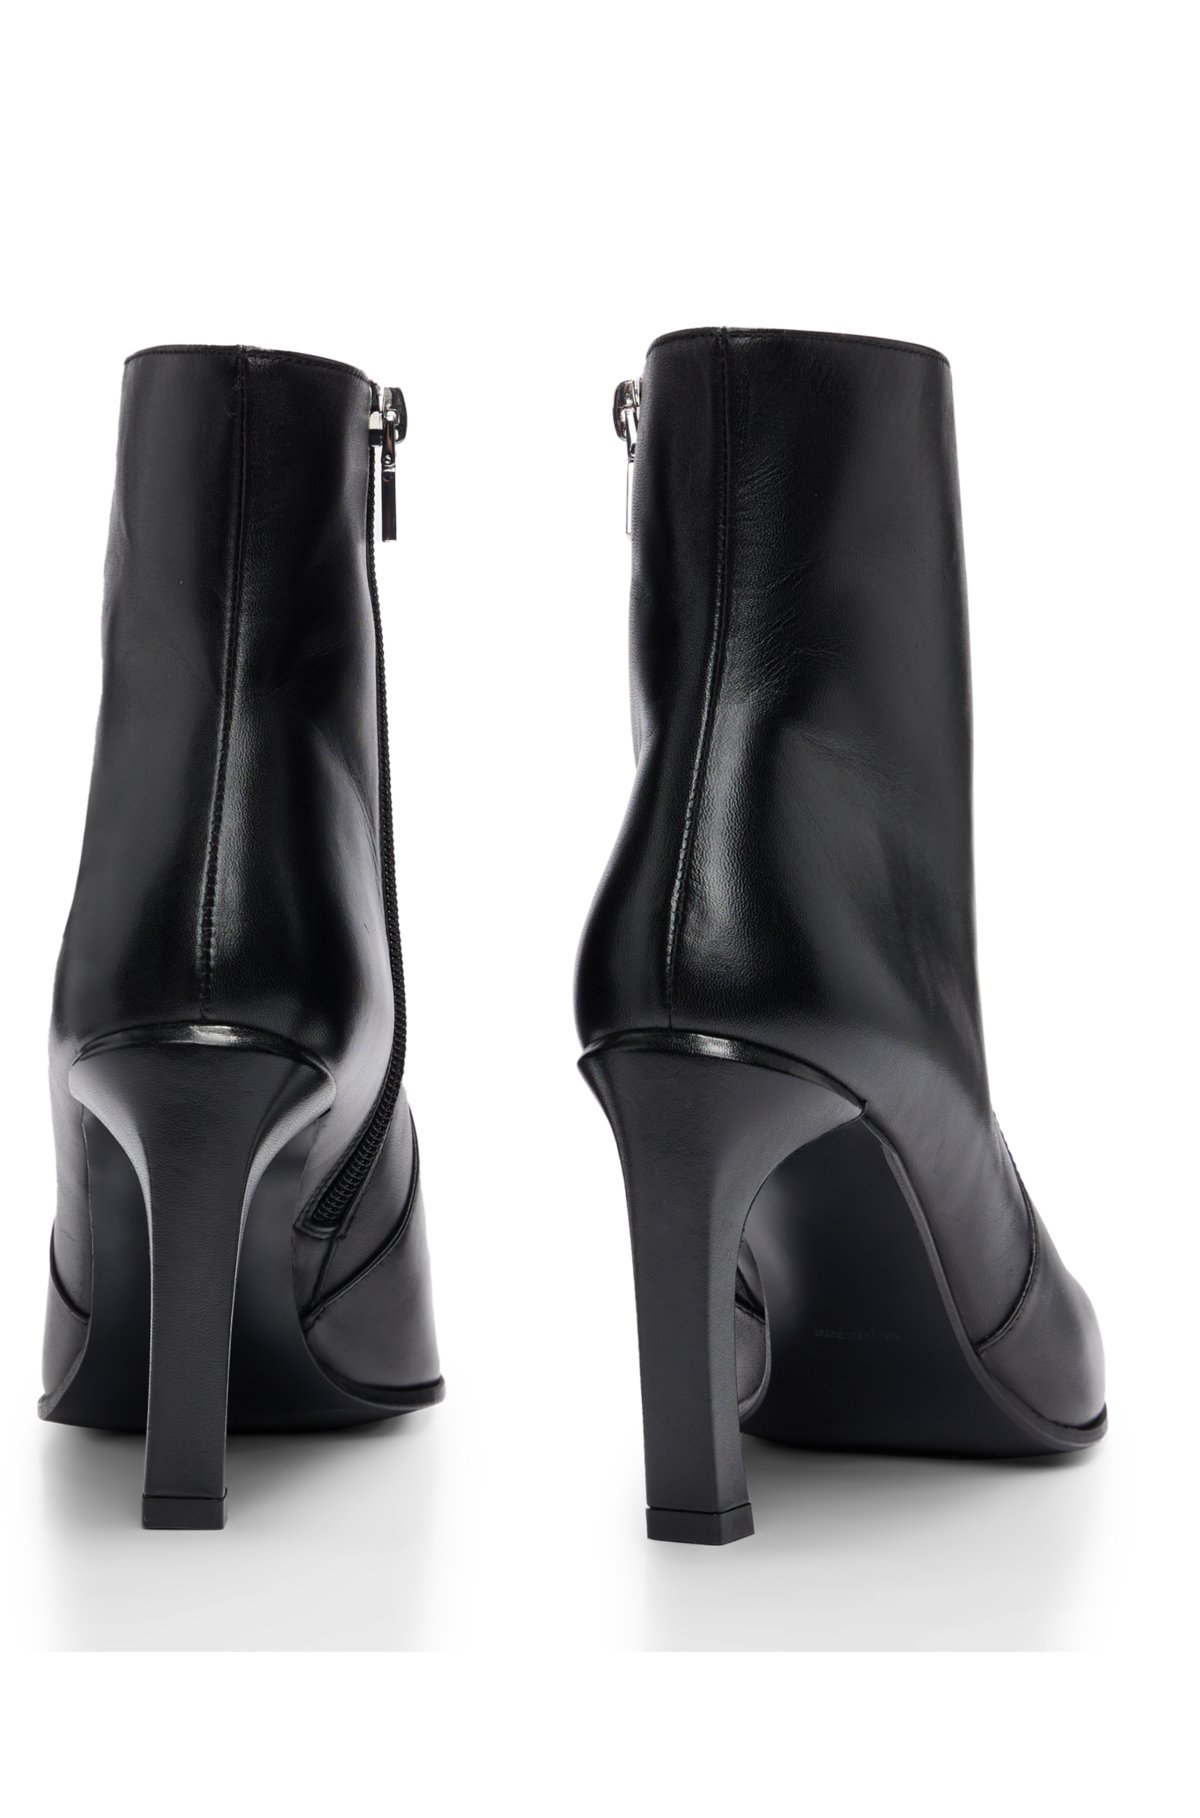 HUGO - Nappa-leather ankle boots with metallic toe